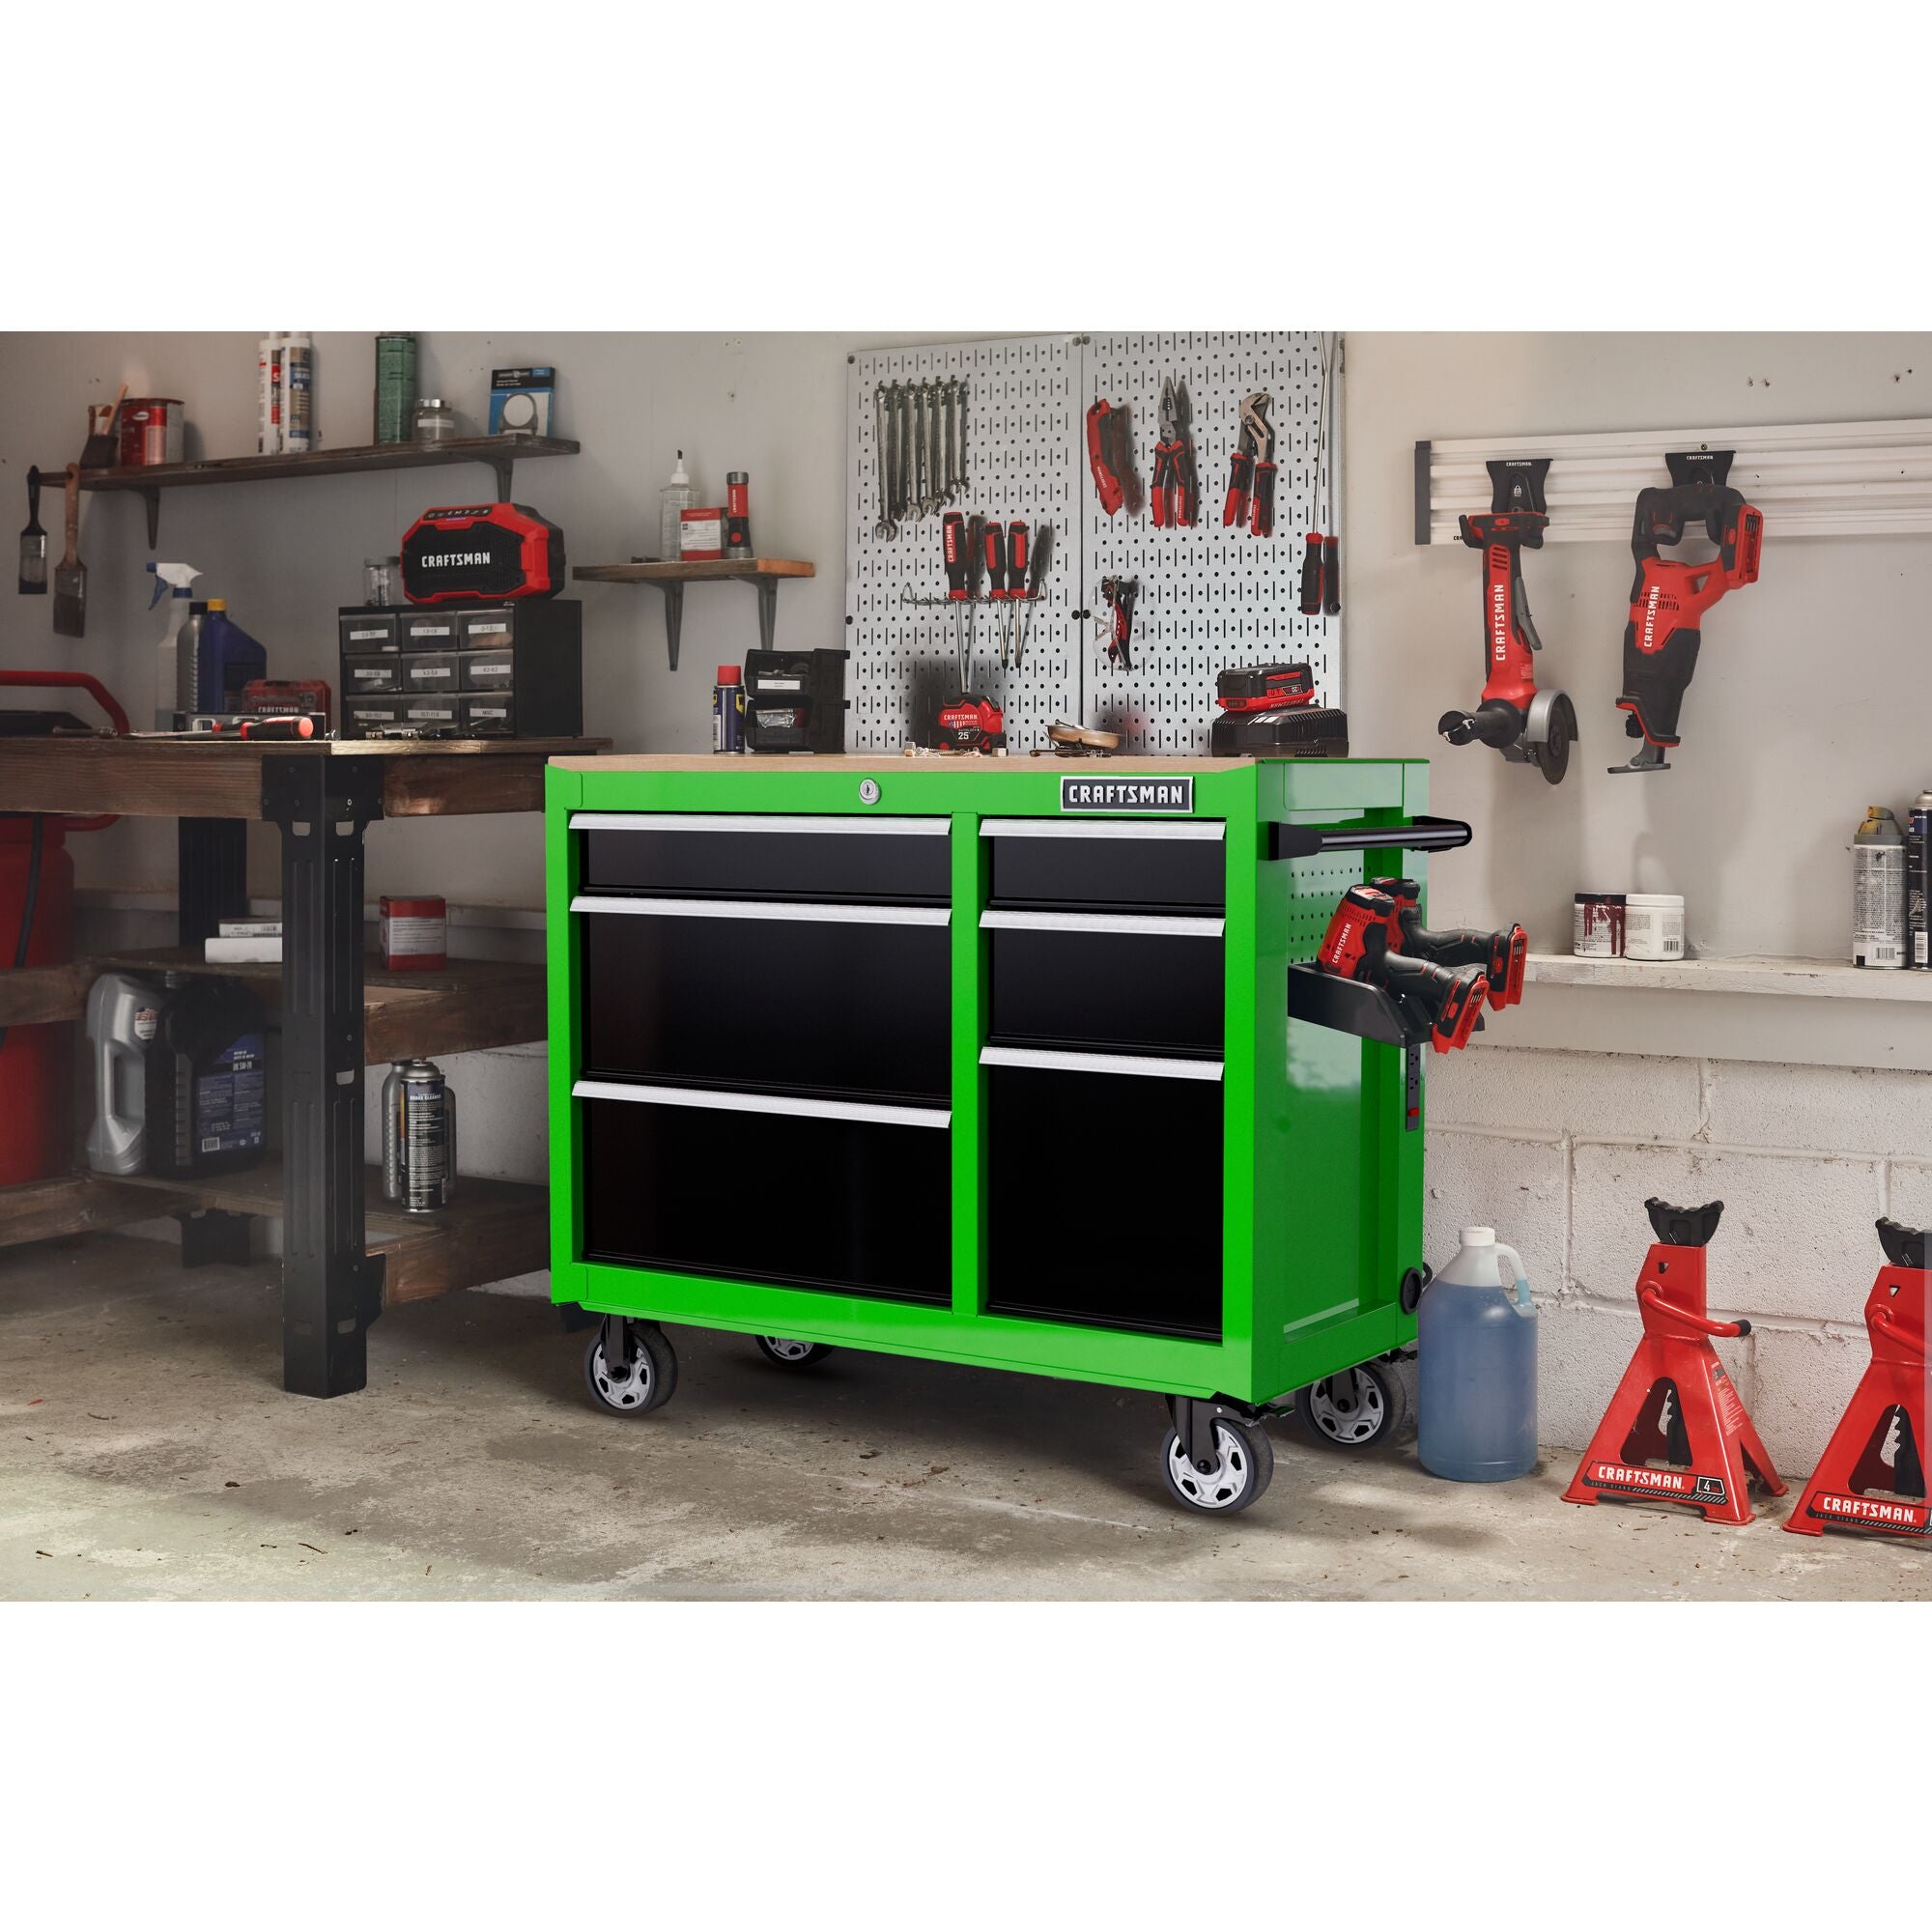 Lime green CRAFTSMAN S2000 Series 41-inch wide 6-drawer workstation with black drawers and wood top, in a residential garage setting surrounded by CRAFTSMAN tools